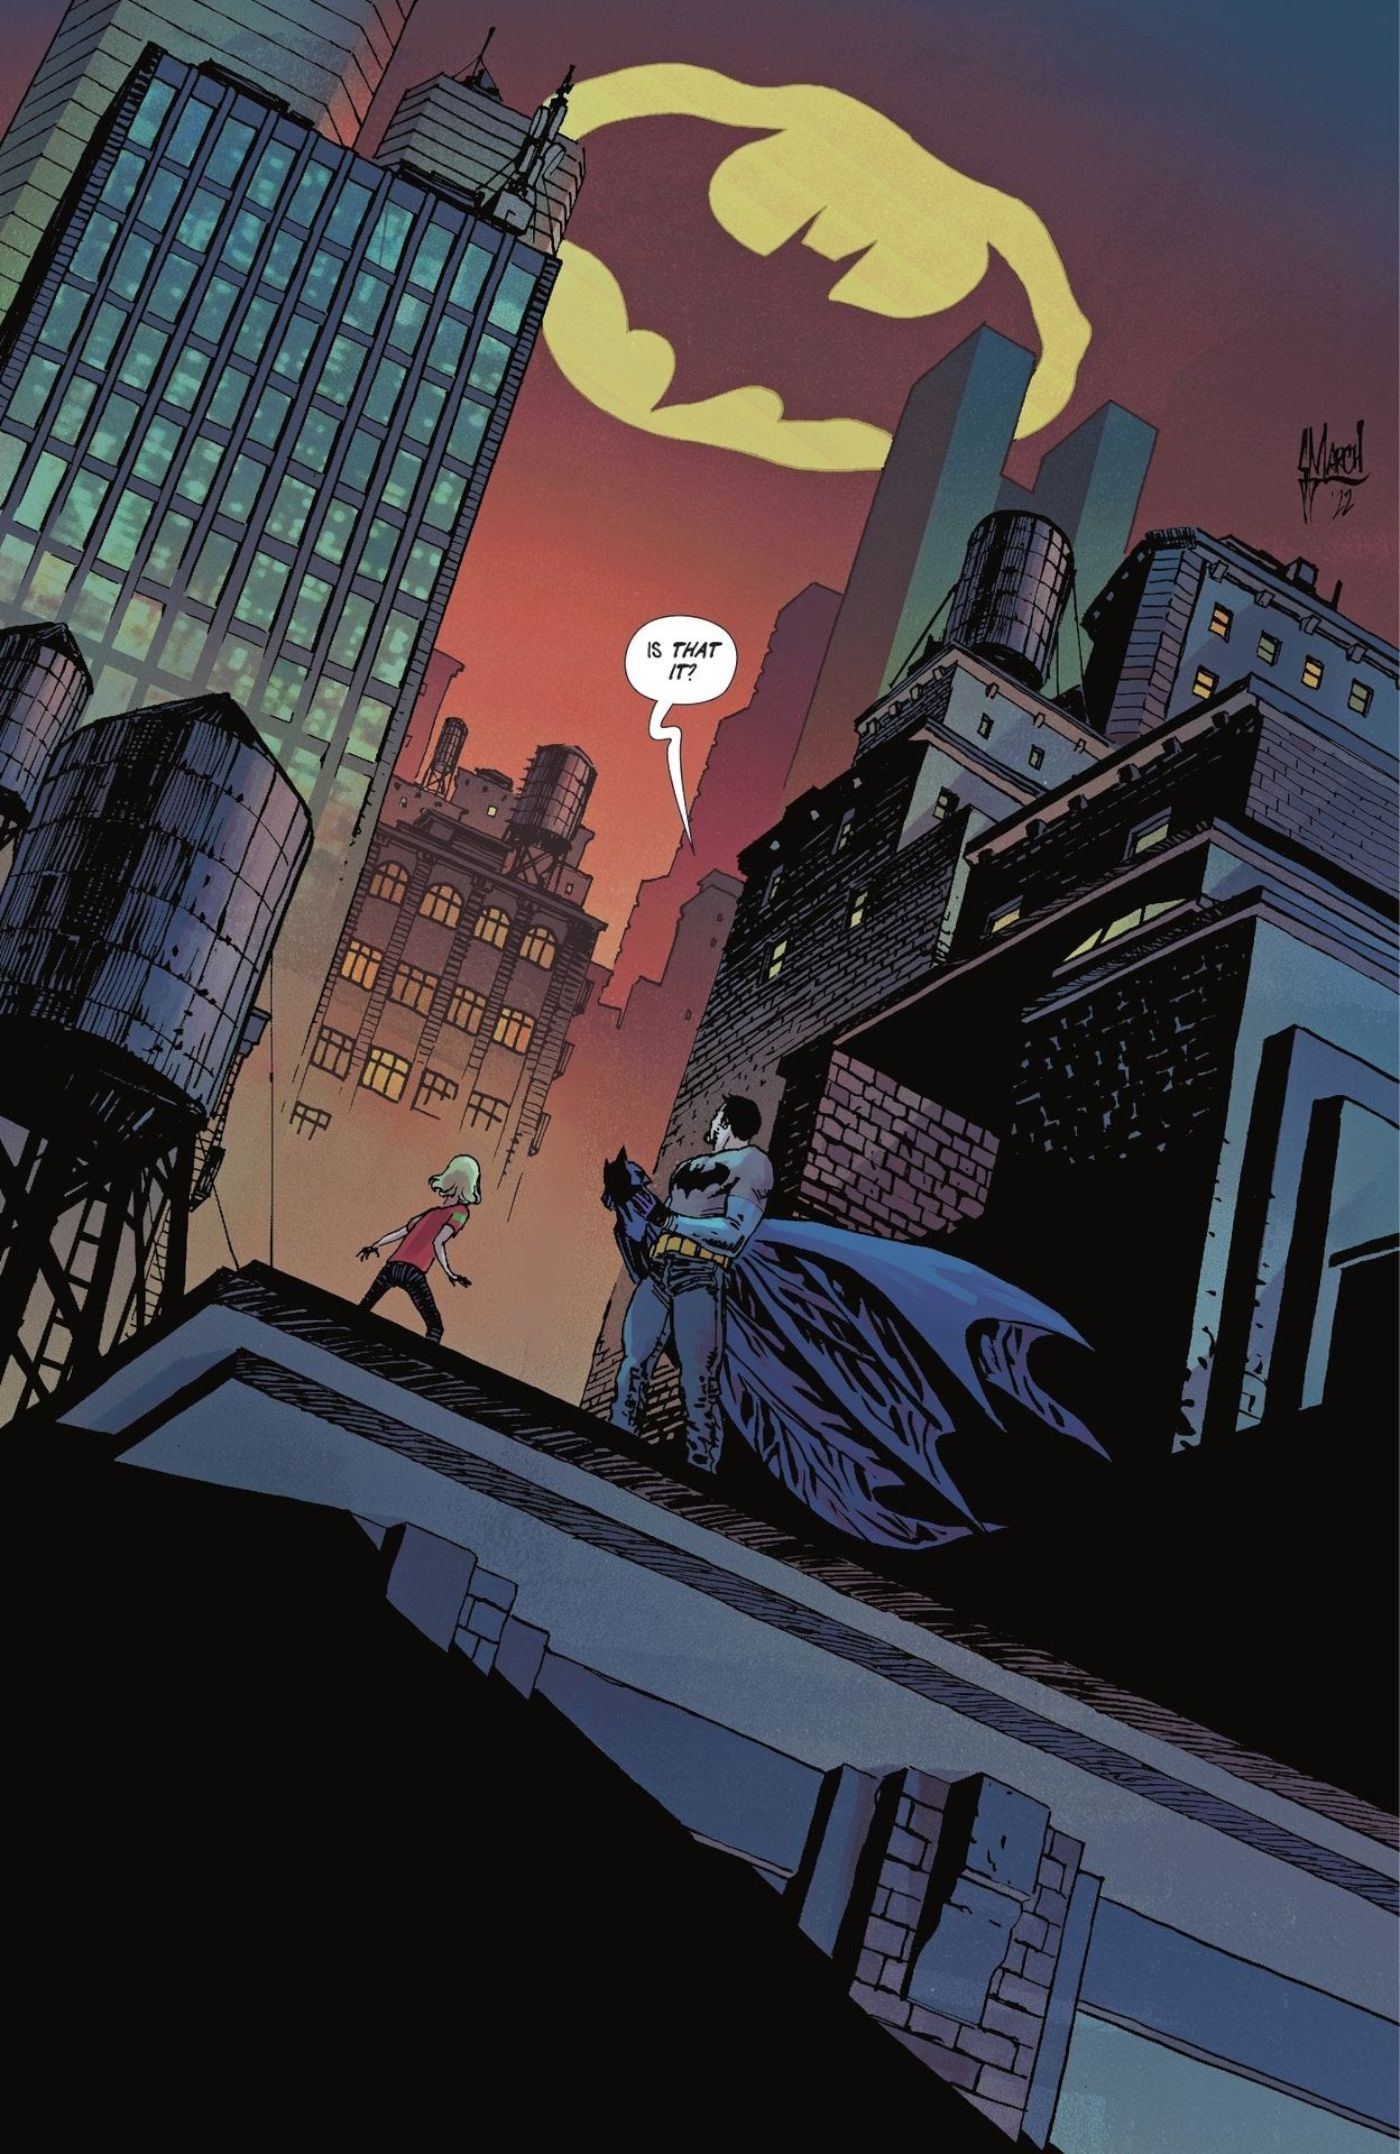 Full comic book page: Batman seees the Batsignal in Gotham while on a rooftop.